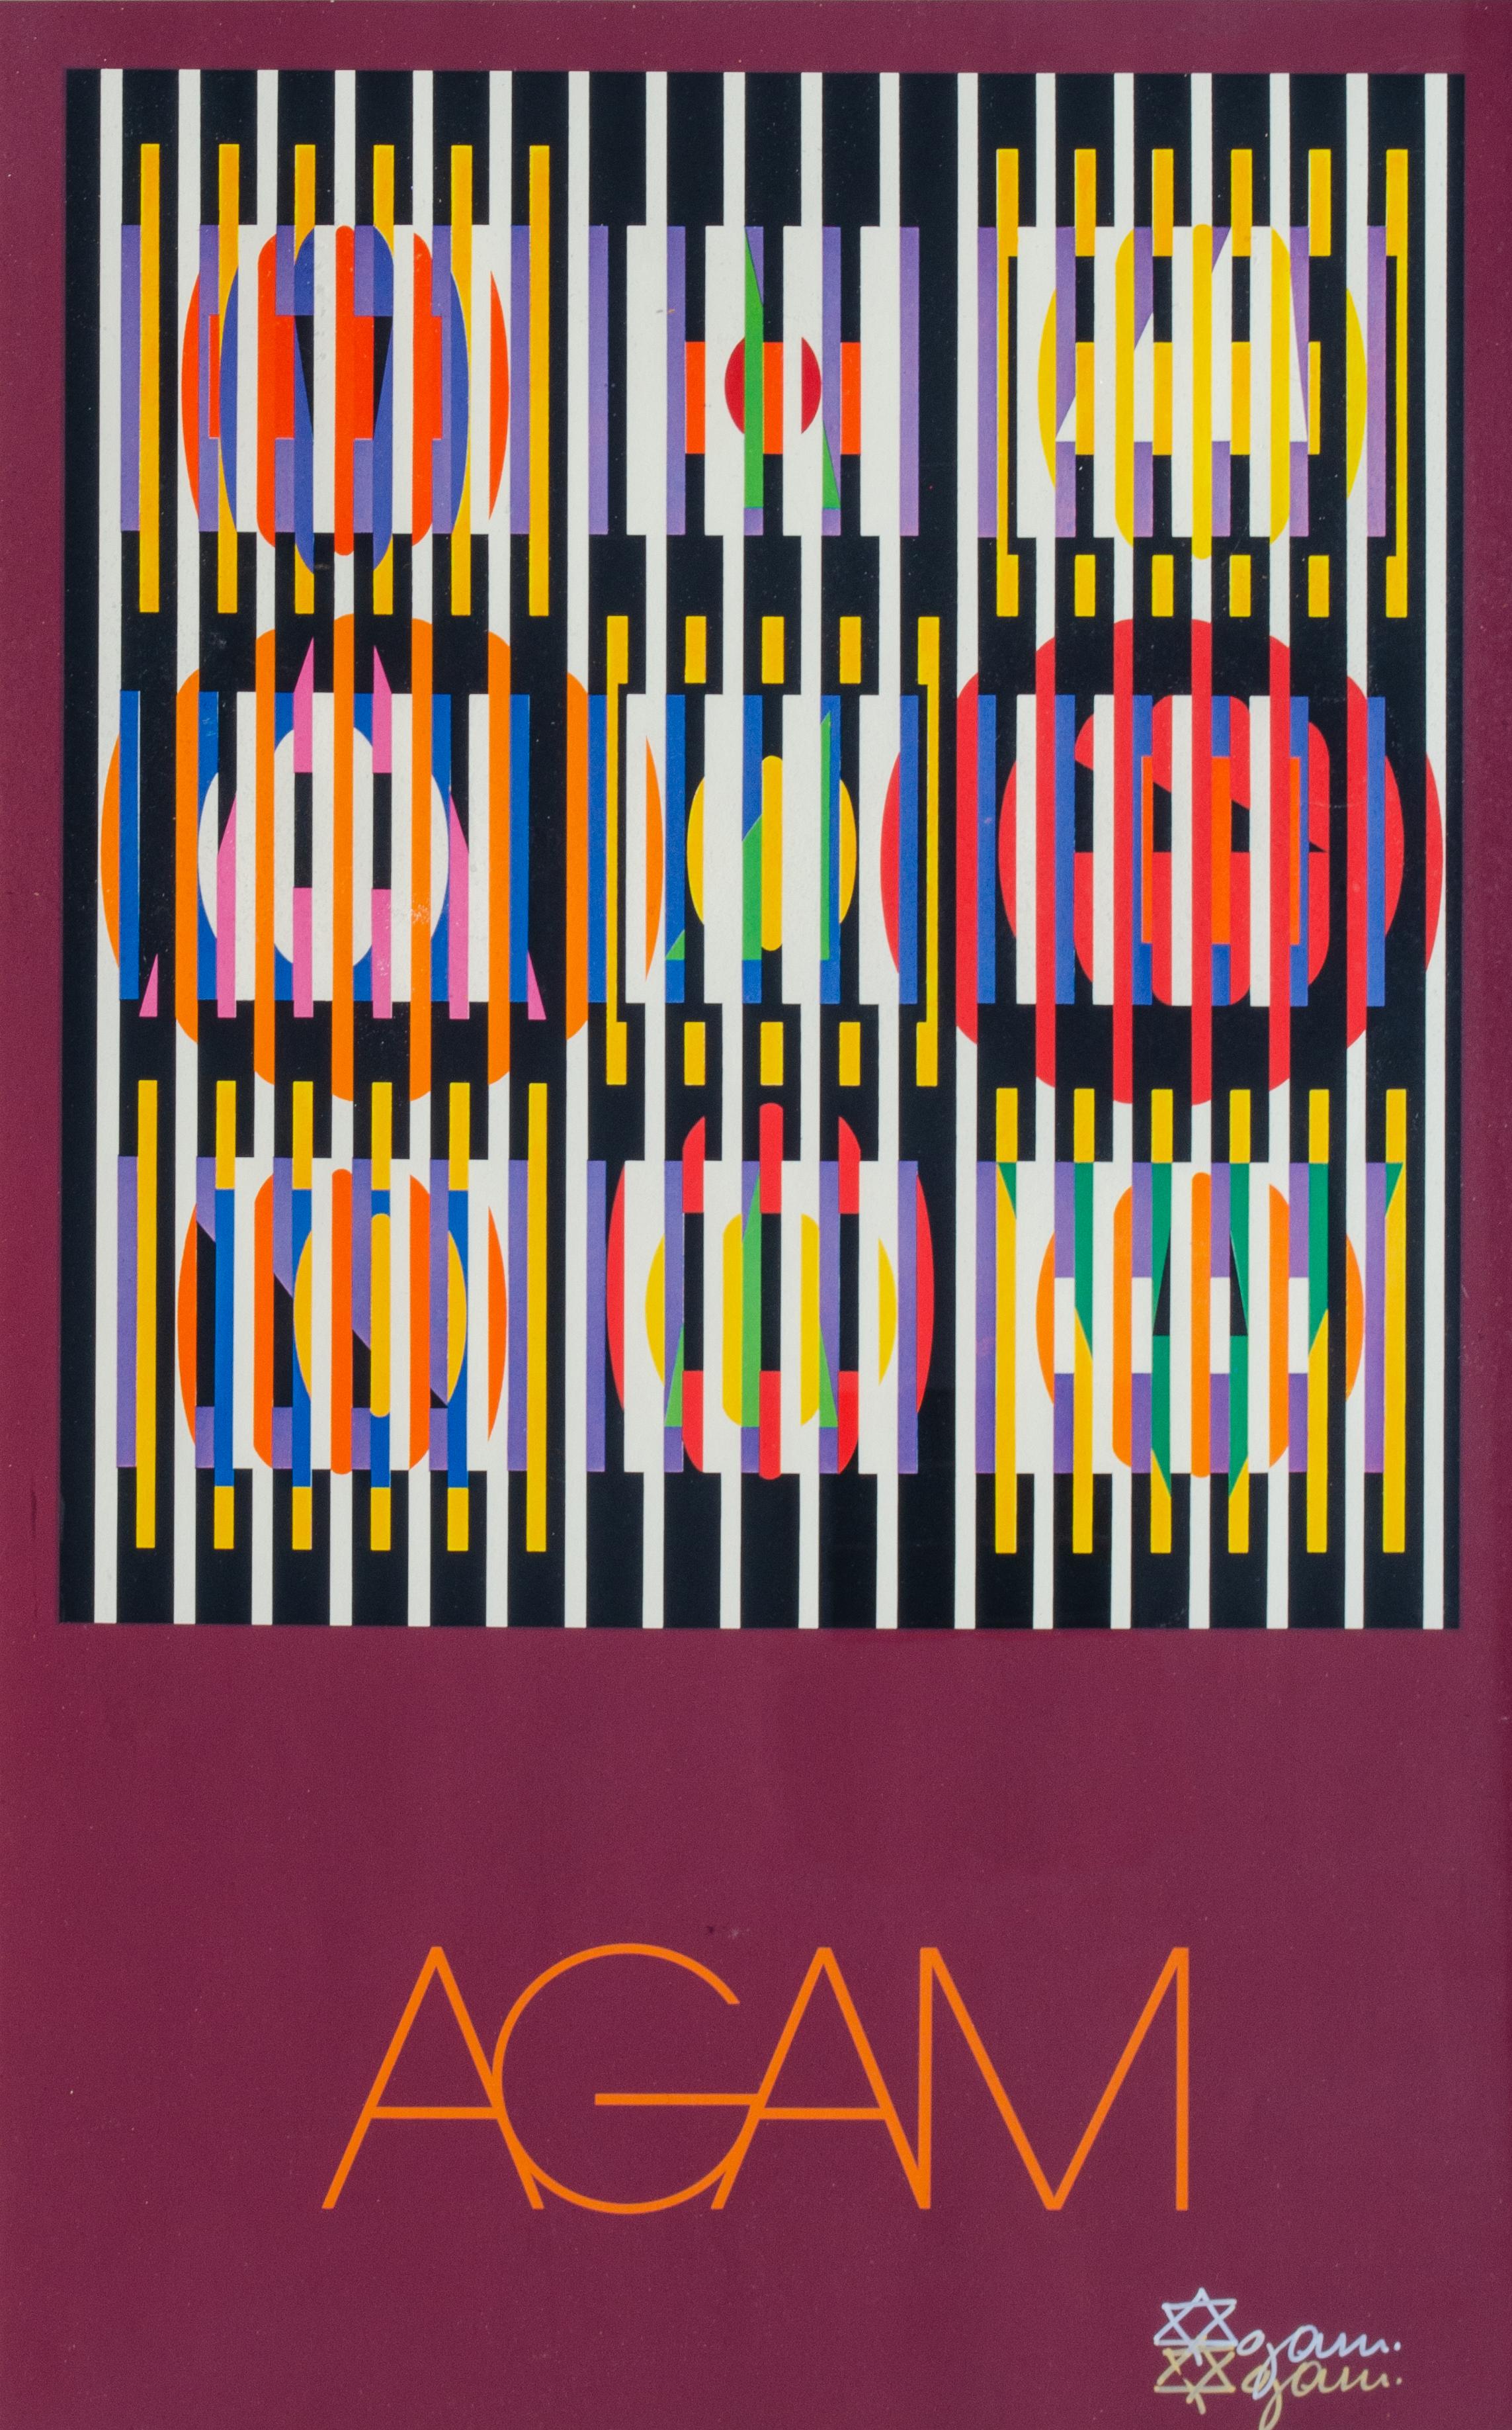 Yaacov Agam (b. 1928)
Untitled, c. 1980
Silkscreen print
Sight: 33 1/2 x 20 1/2 in. (image)
Framed: 52 x 29 1/8 x 1 in. 
Signed lower right
Inscribed verso

Yaacov Agam was born Yaacov Gipstein in Rishon le Zion, in Israel on May 11, 1928.  His